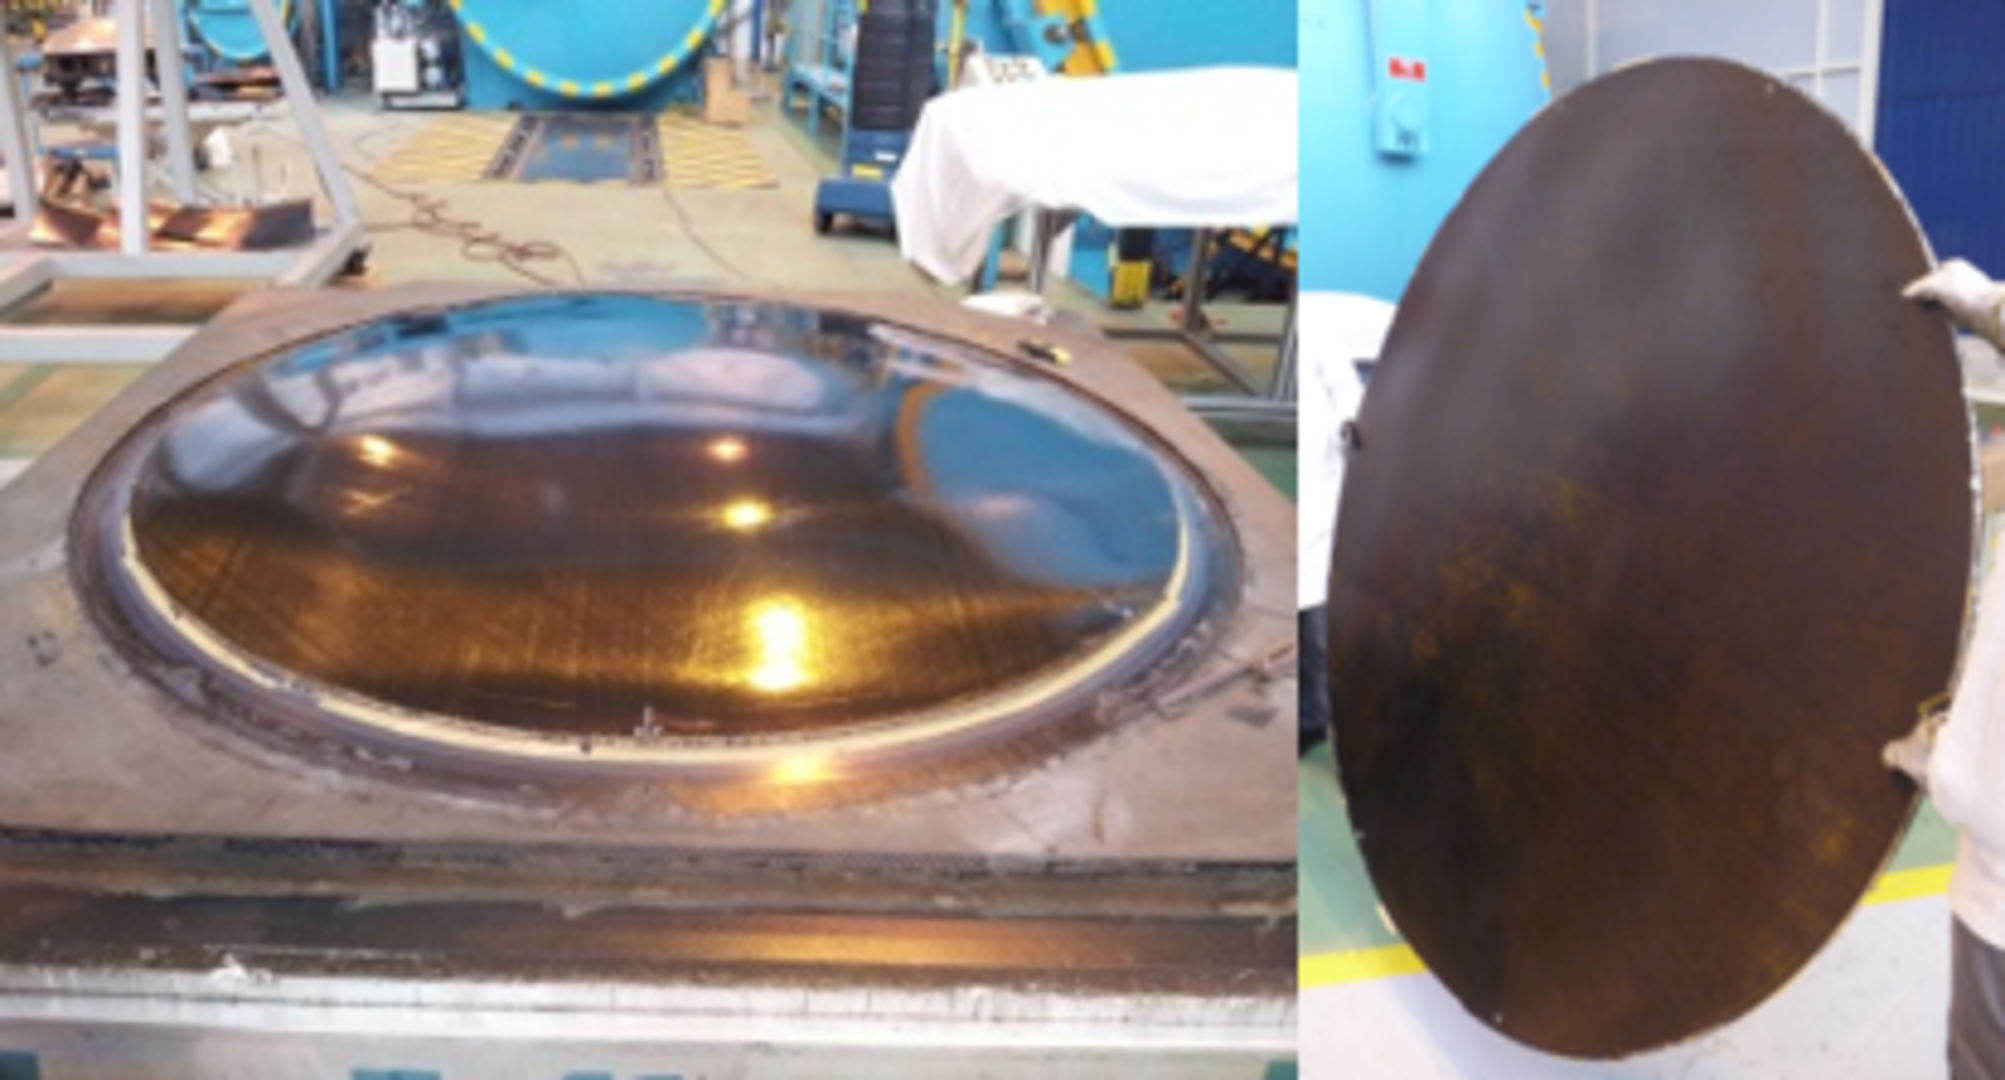 Different views of the antenna reflector